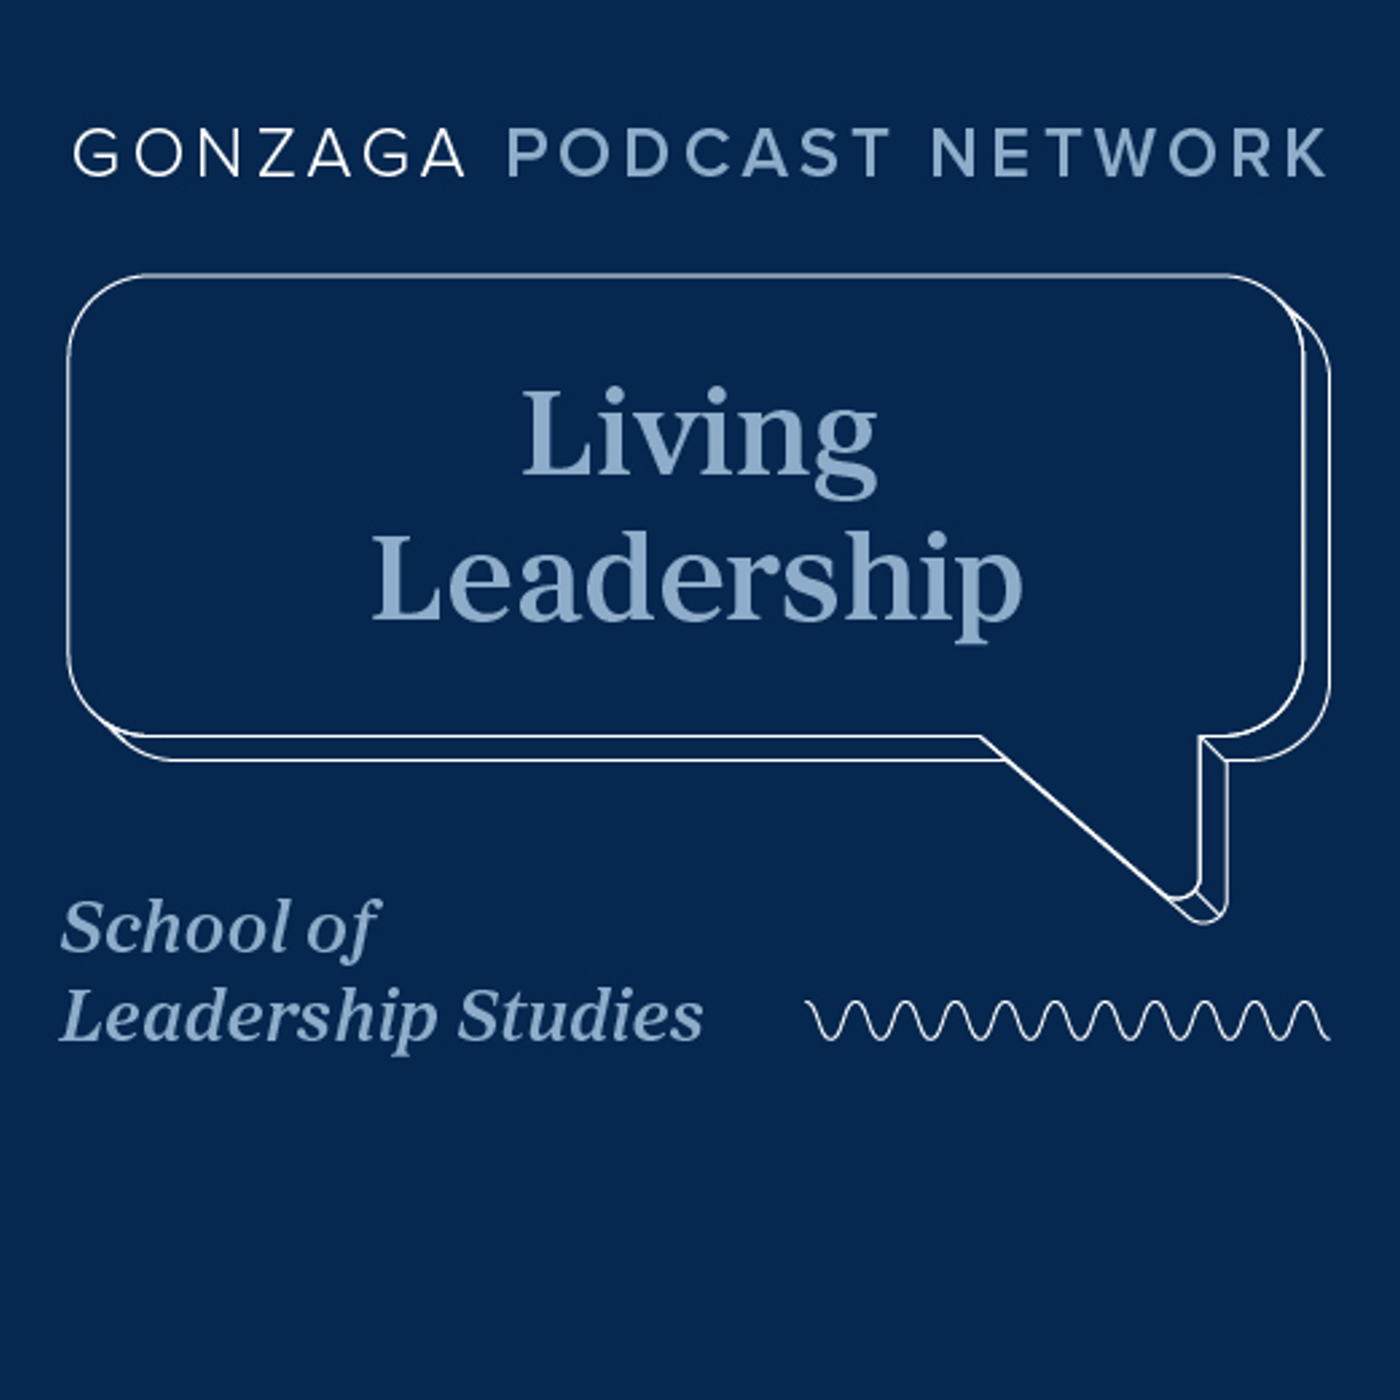 S01 E02 - How to Lead During Crisis (and How to Support Leaders): Emotional Intelligence, Resilience, and Stress Management